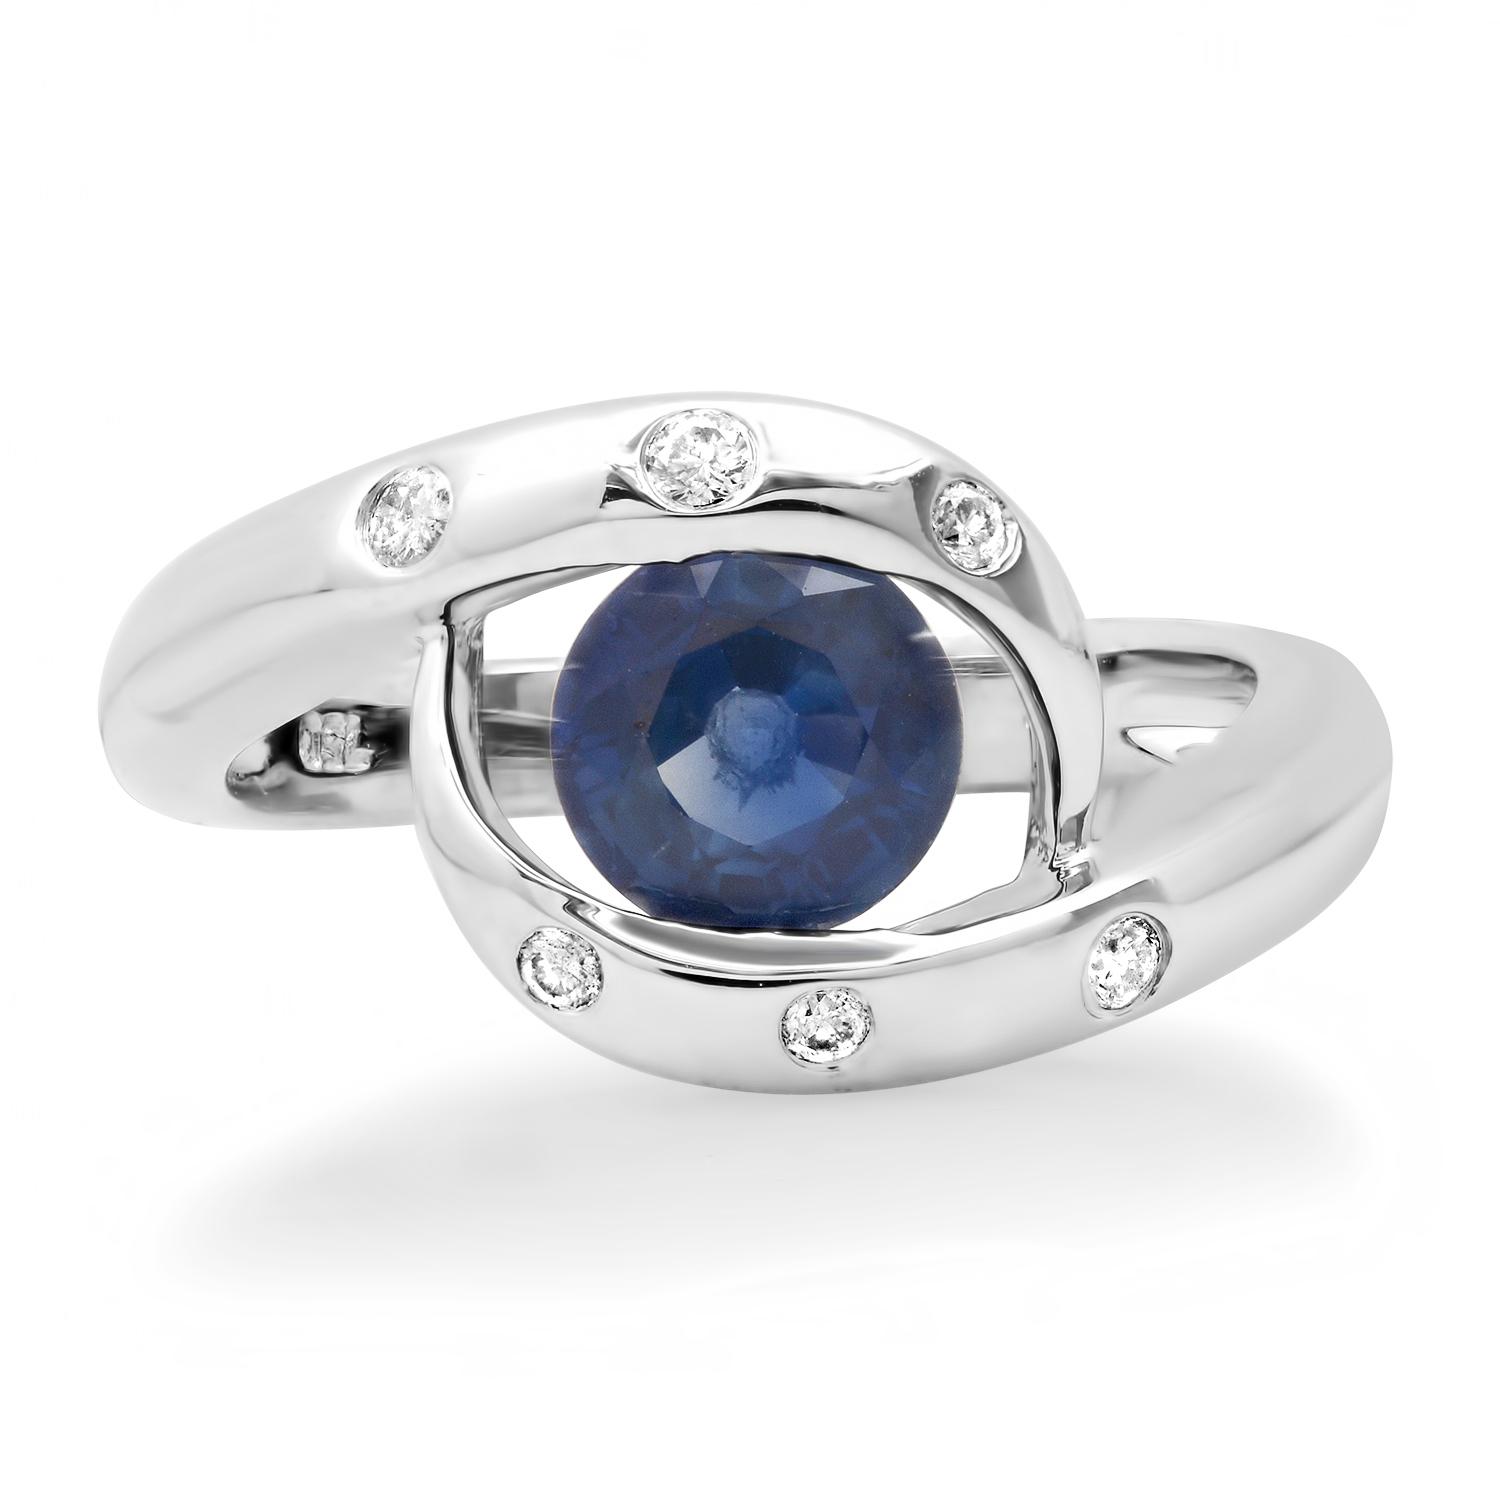 18K White Gold Setting with 1.49ct Sapphire and 0.12ct Diamond Ring